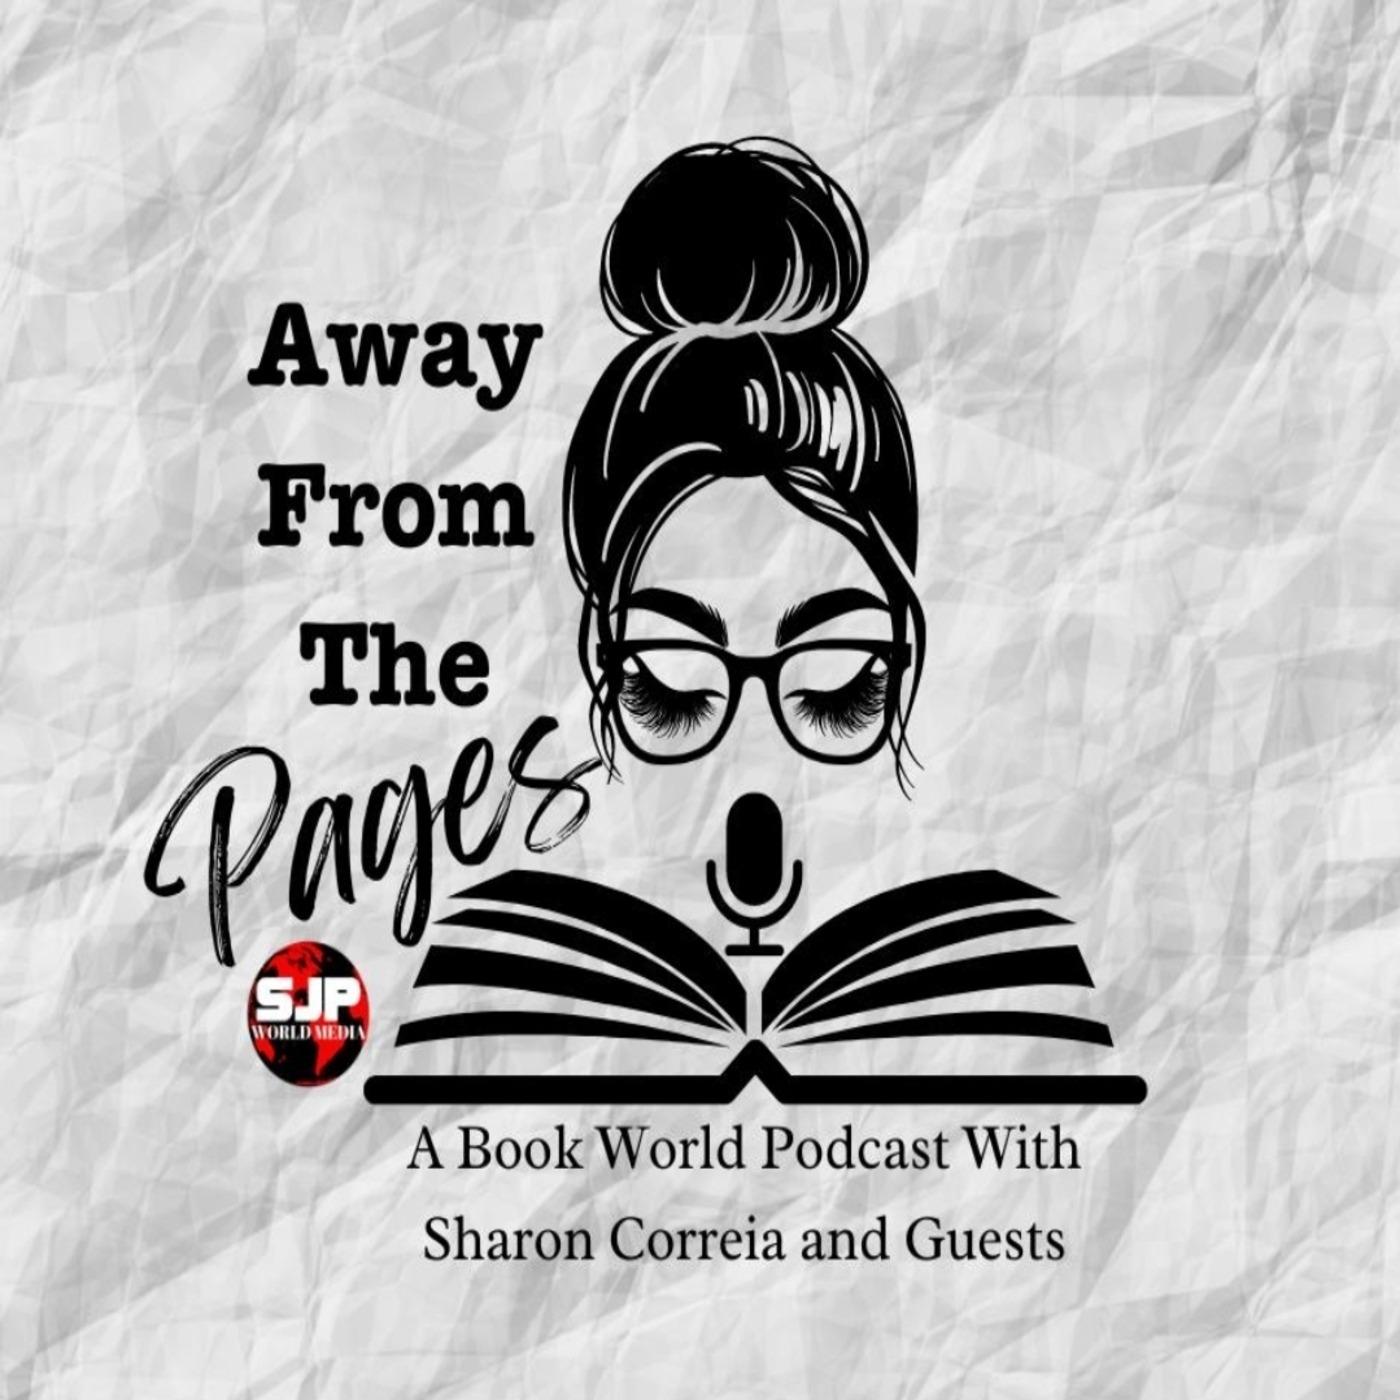 AWAY FROM THE PAGES - A Book World Podcast